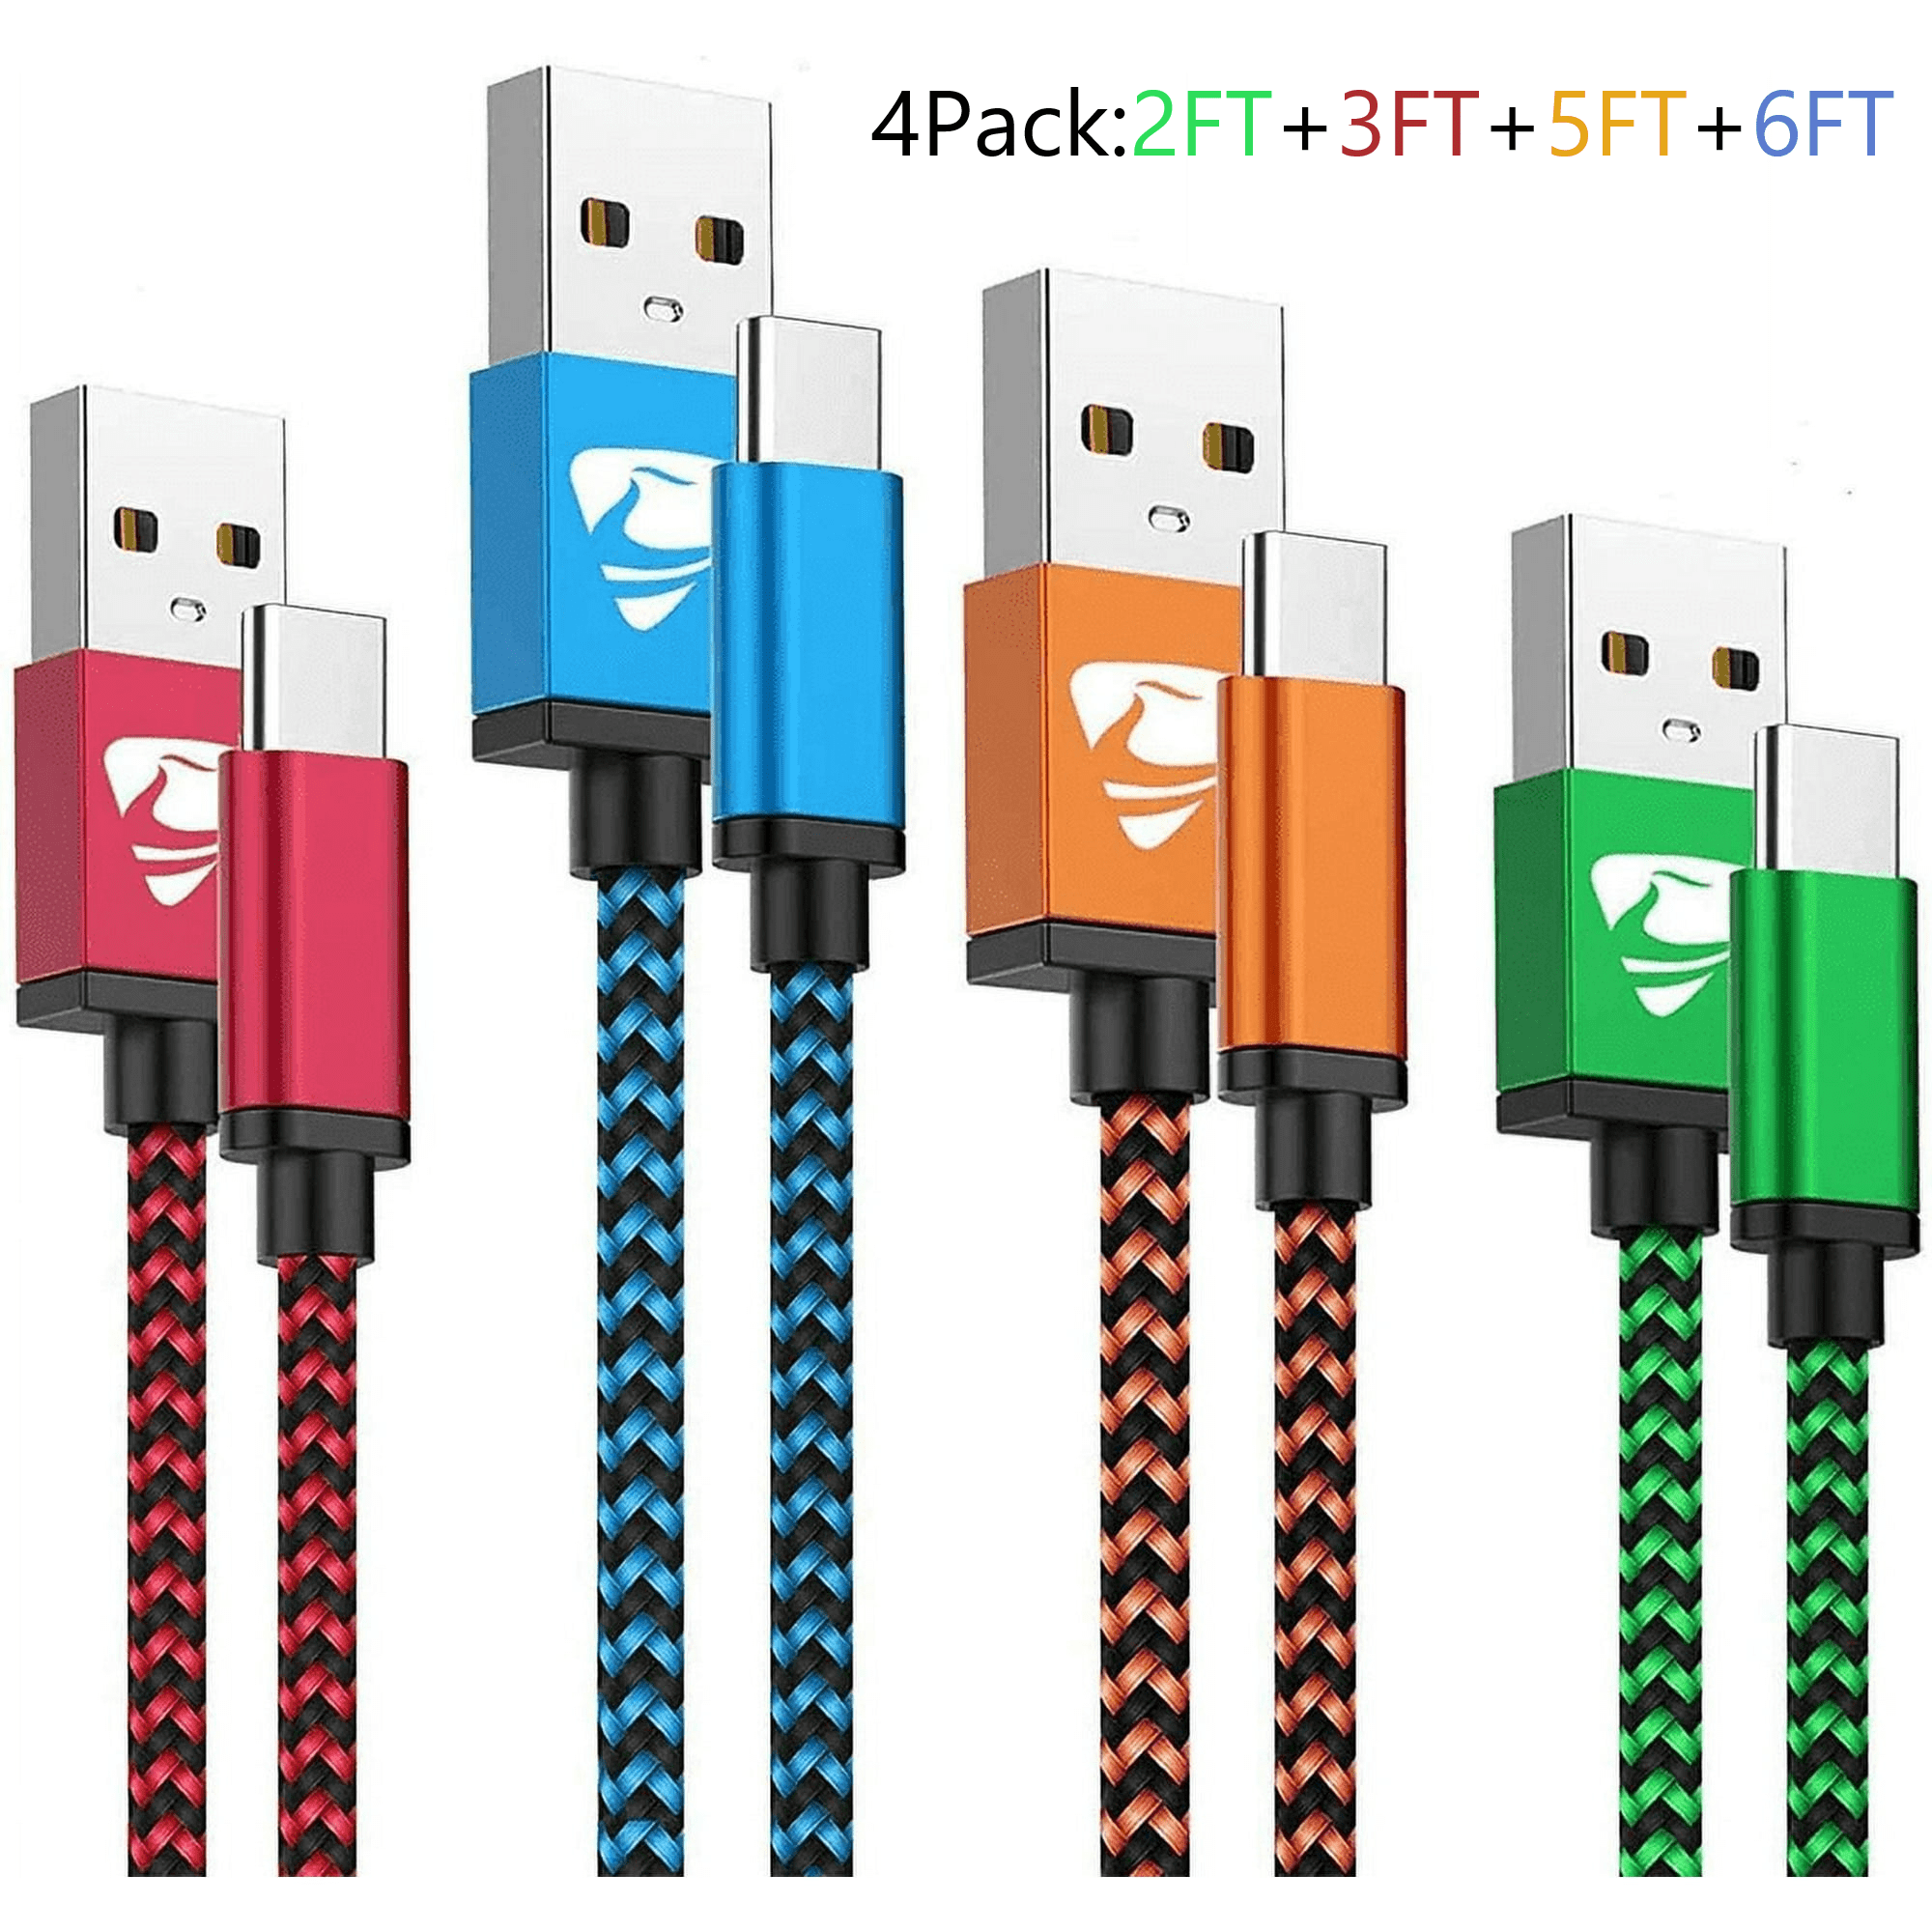 [4 Pack]2/3/5/6FT USB C Cable,4 Pack Fast Charging Nylon Type C Phone ...